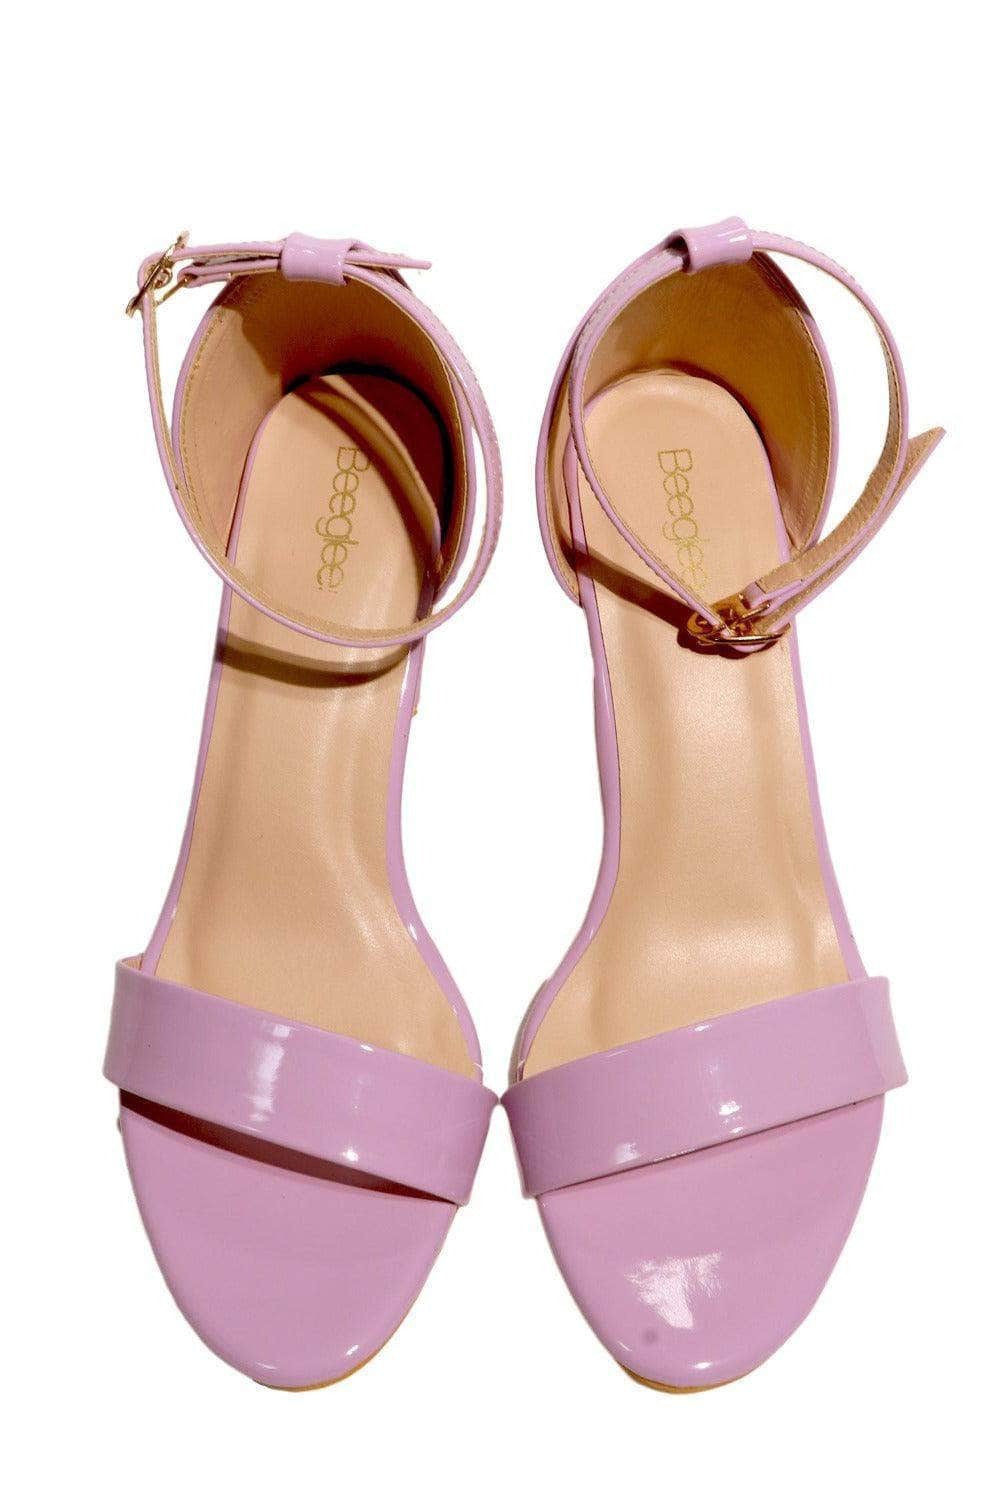 Lilac Patent Heels With Buckle Closure - BEEGLEE